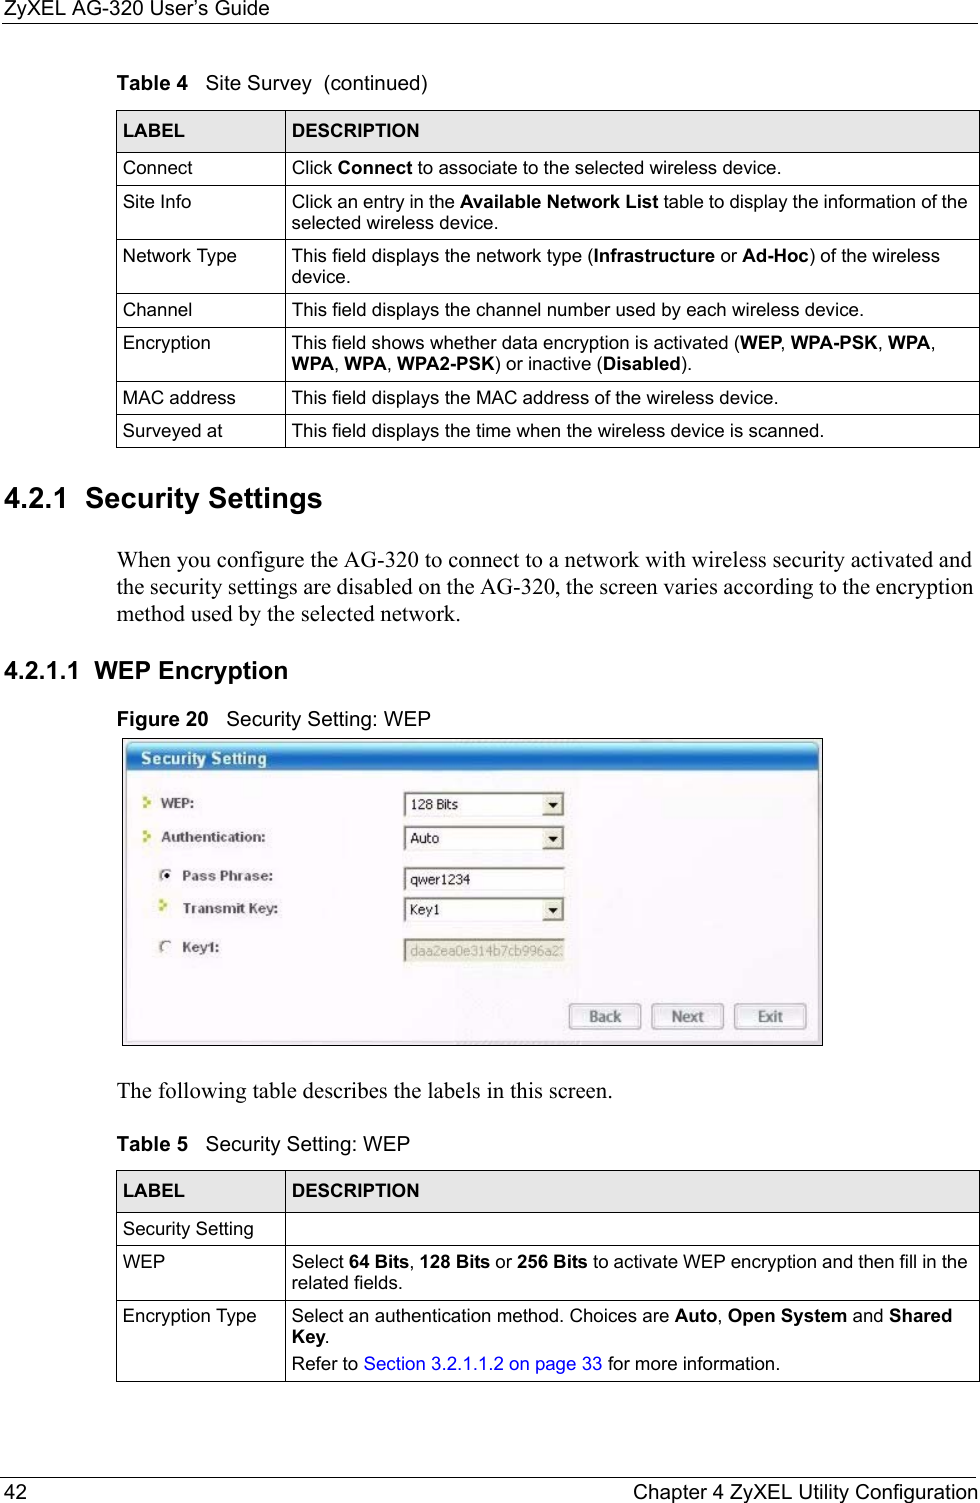 ZyXEL AG-320 User’s Guide42 Chapter 4 ZyXEL Utility Configuration4.2.1  Security Settings When you configure the AG-320 to connect to a network with wireless security activated and the security settings are disabled on the AG-320, the screen varies according to the encryption method used by the selected network.4.2.1.1  WEP EncryptionFigure 20   Security Setting: WEP  The following table describes the labels in this screen.  Connect Click Connect to associate to the selected wireless device.Site Info Click an entry in the Available Network List table to display the information of the selected wireless device.Network Type  This field displays the network type (Infrastructure or Ad-Hoc) of the wireless device.Channel This field displays the channel number used by each wireless device.Encryption This field shows whether data encryption is activated (WEP, WPA-PSK, WPA, WPA, WPA, WPA2-PSK) or inactive (Disabled).MAC address  This field displays the MAC address of the wireless device.Surveyed at  This field displays the time when the wireless device is scanned.Table 4   Site Survey  (continued)LABEL DESCRIPTIONTable 5   Security Setting: WEP LABEL DESCRIPTIONSecurity SettingWEP Select 64 Bits, 128 Bits or 256 Bits to activate WEP encryption and then fill in the related fields.Encryption Type Select an authentication method. Choices are Auto, Open System and Shared Key.Refer to Section 3.2.1.1.2 on page 33 for more information.